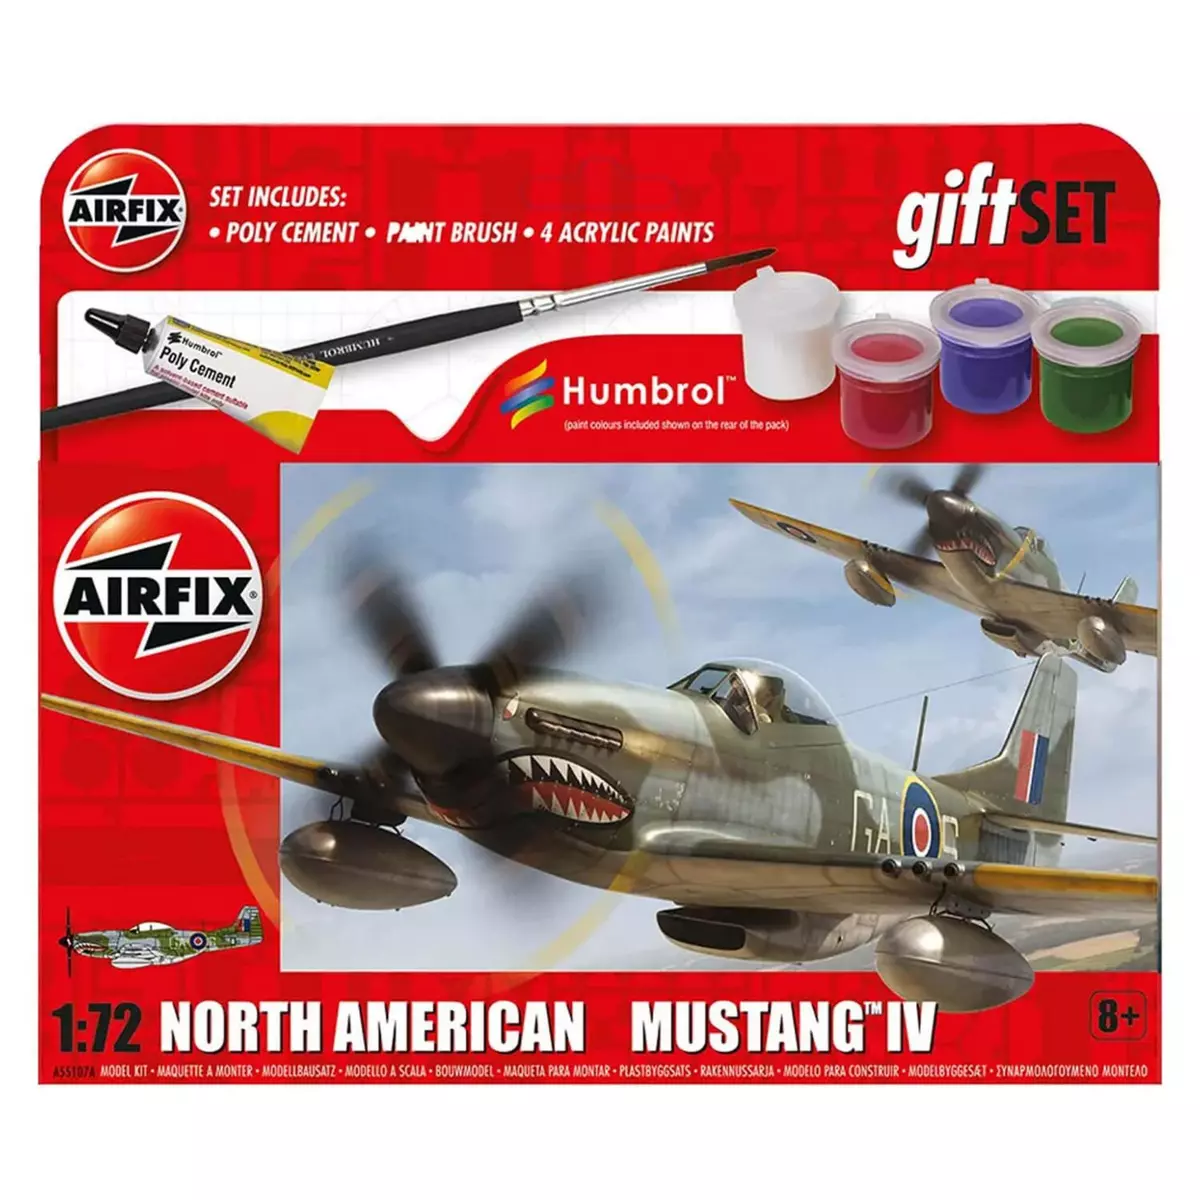 Airfix Maquette avion : Gift Set : North American Mustang Mk.IV